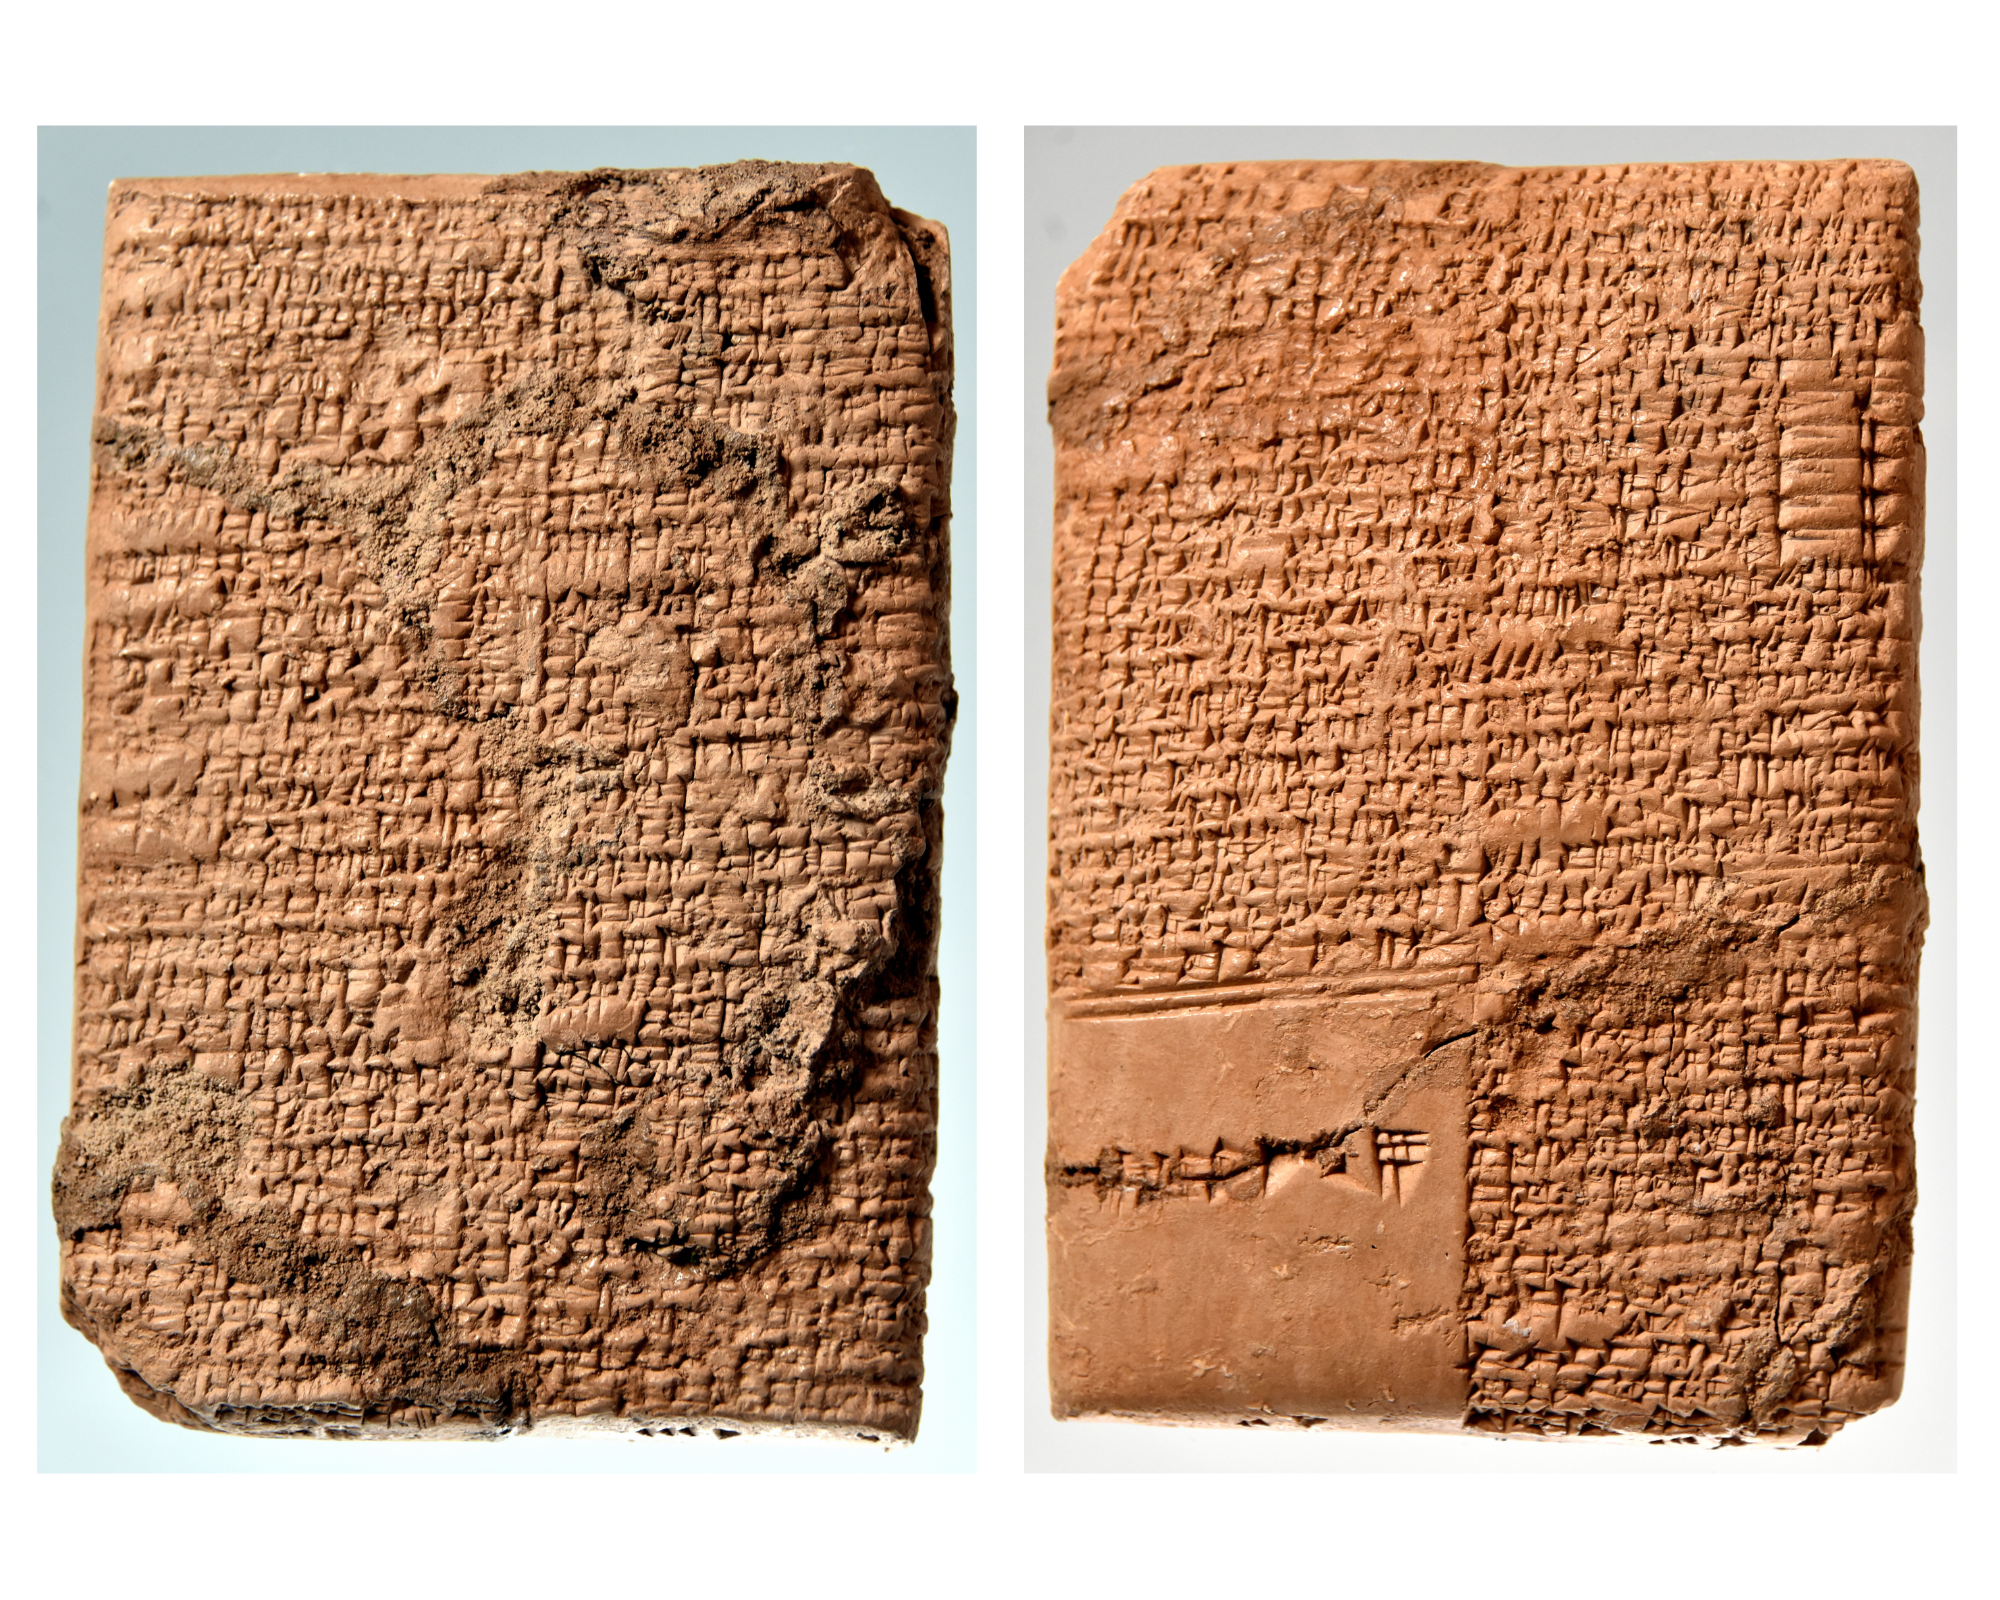 obverse and reverse of a clay tablet with Sumerian text inscribed on it